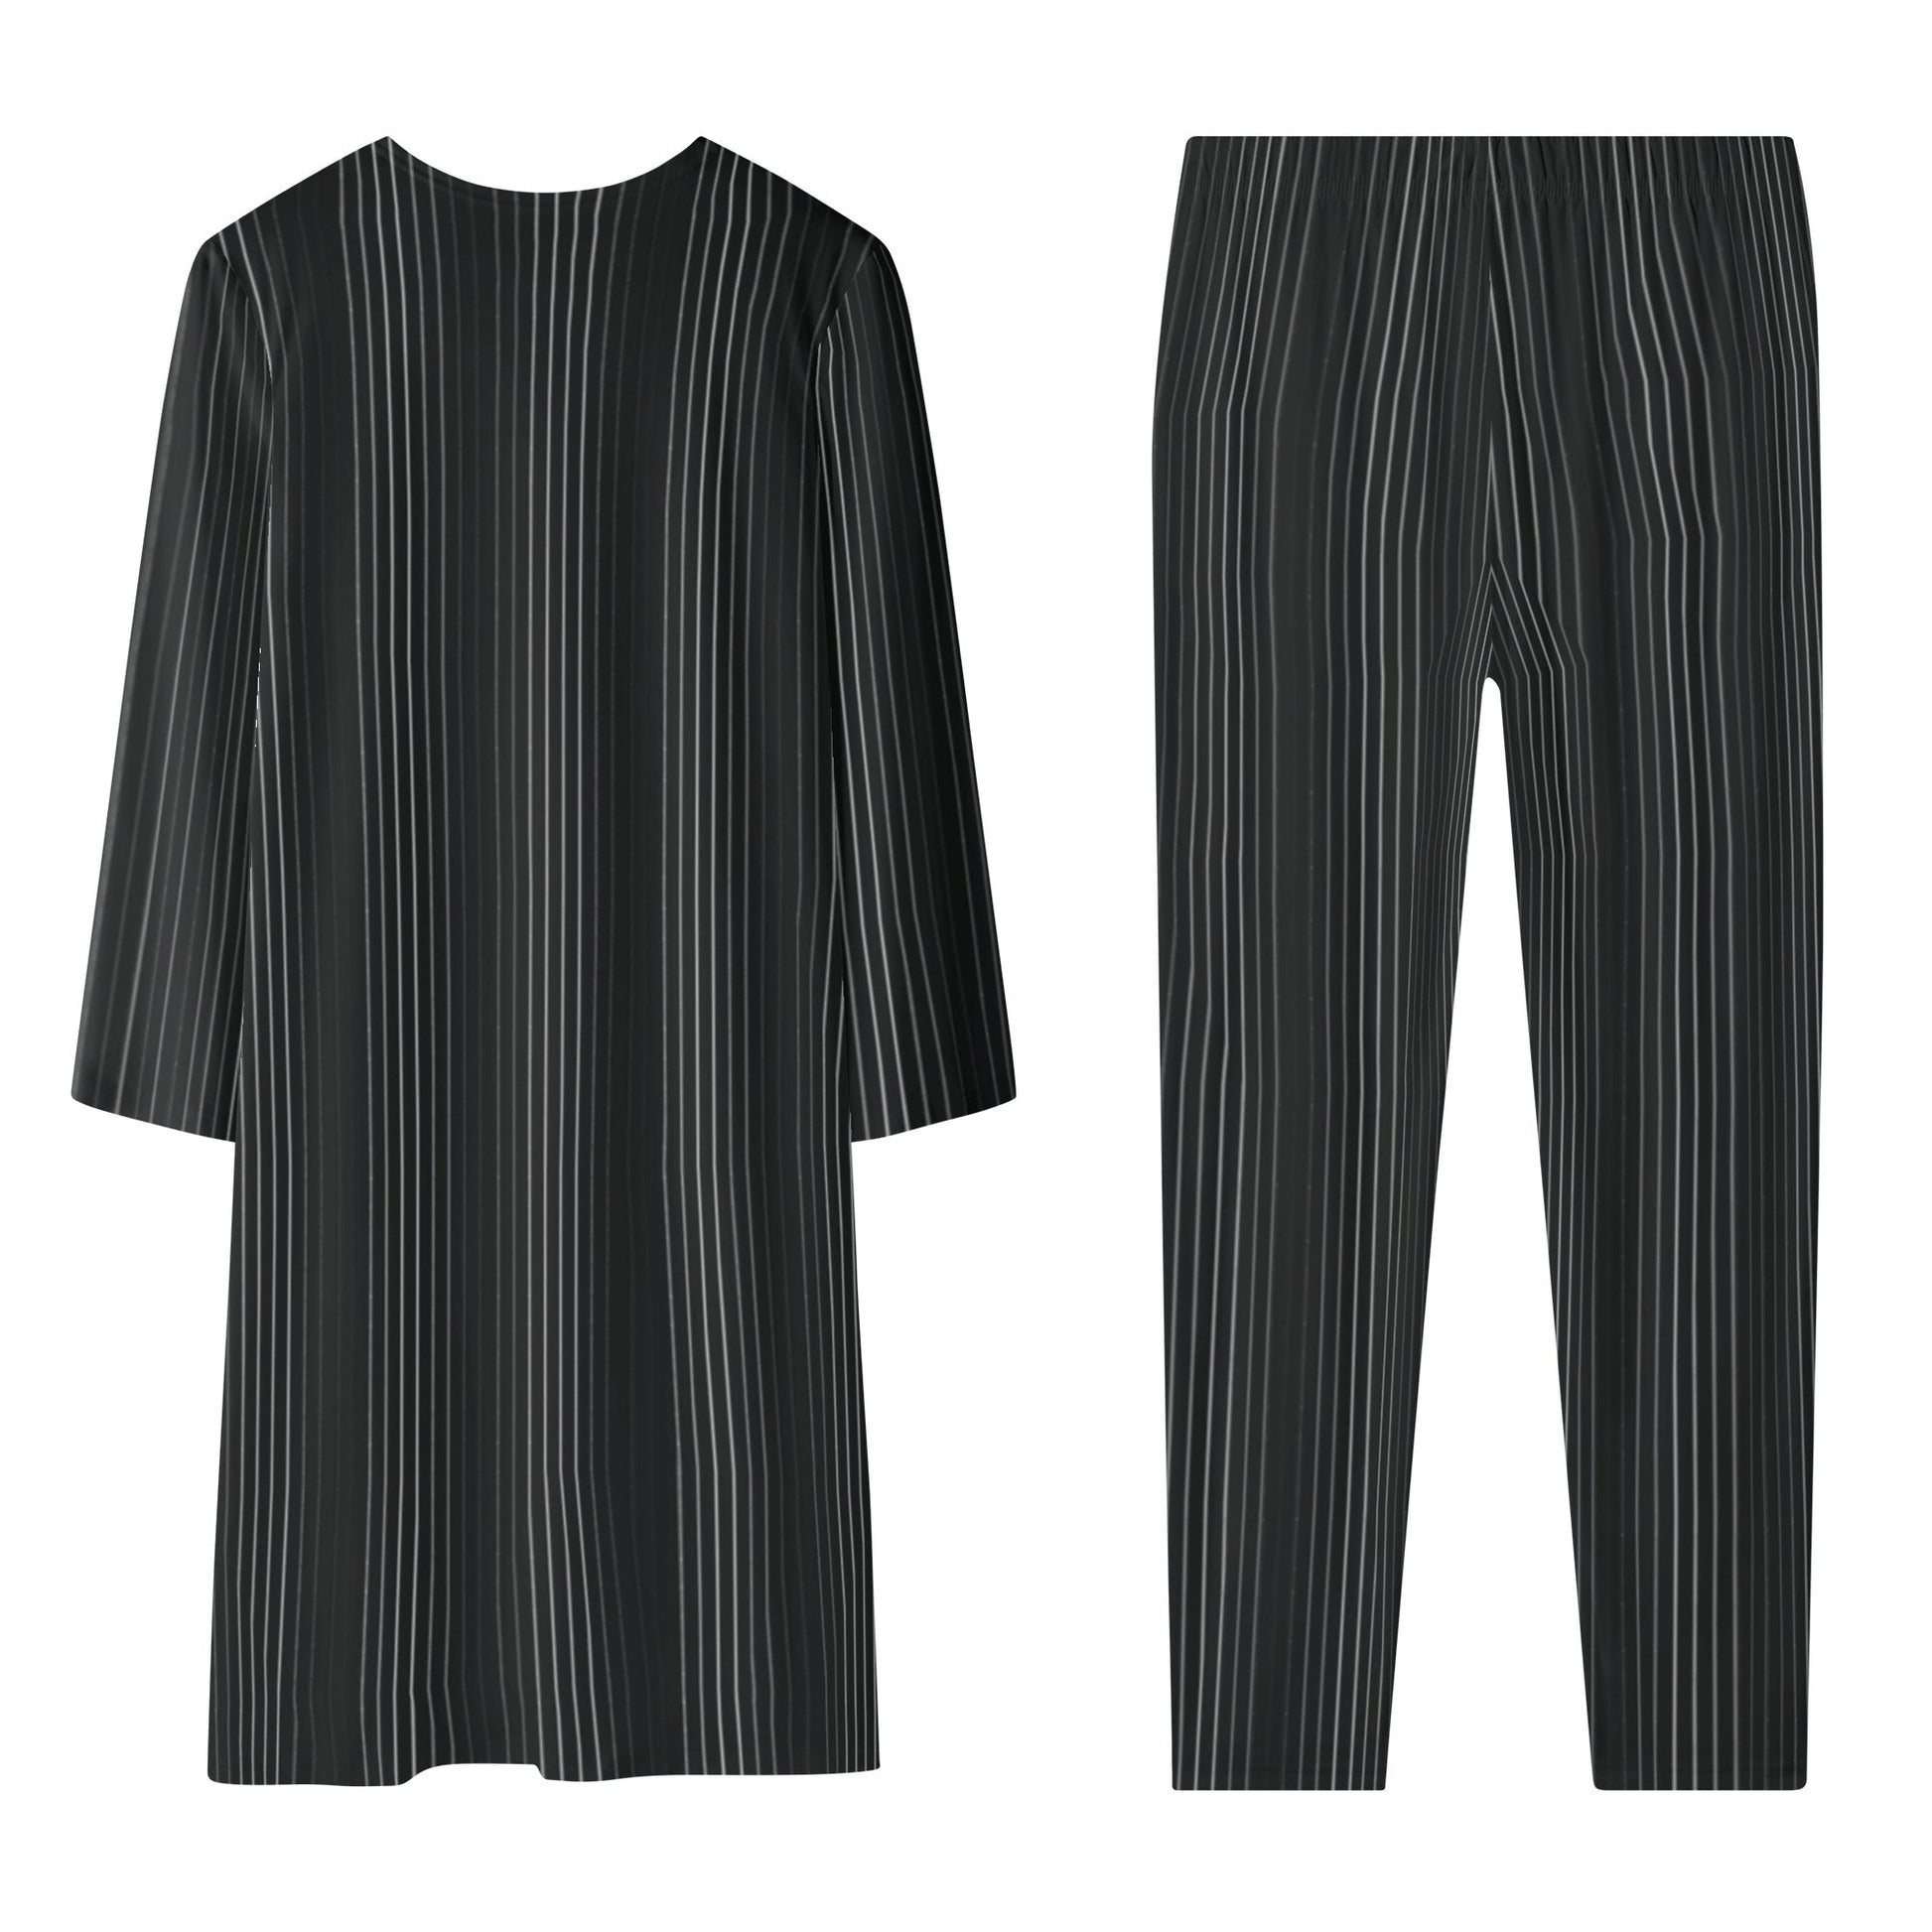 Stand out  with the  Pinstriped Women's Long Sleeve Cardigan and Leggings 2pcs  available at Hey Nugget. Grab yours today!